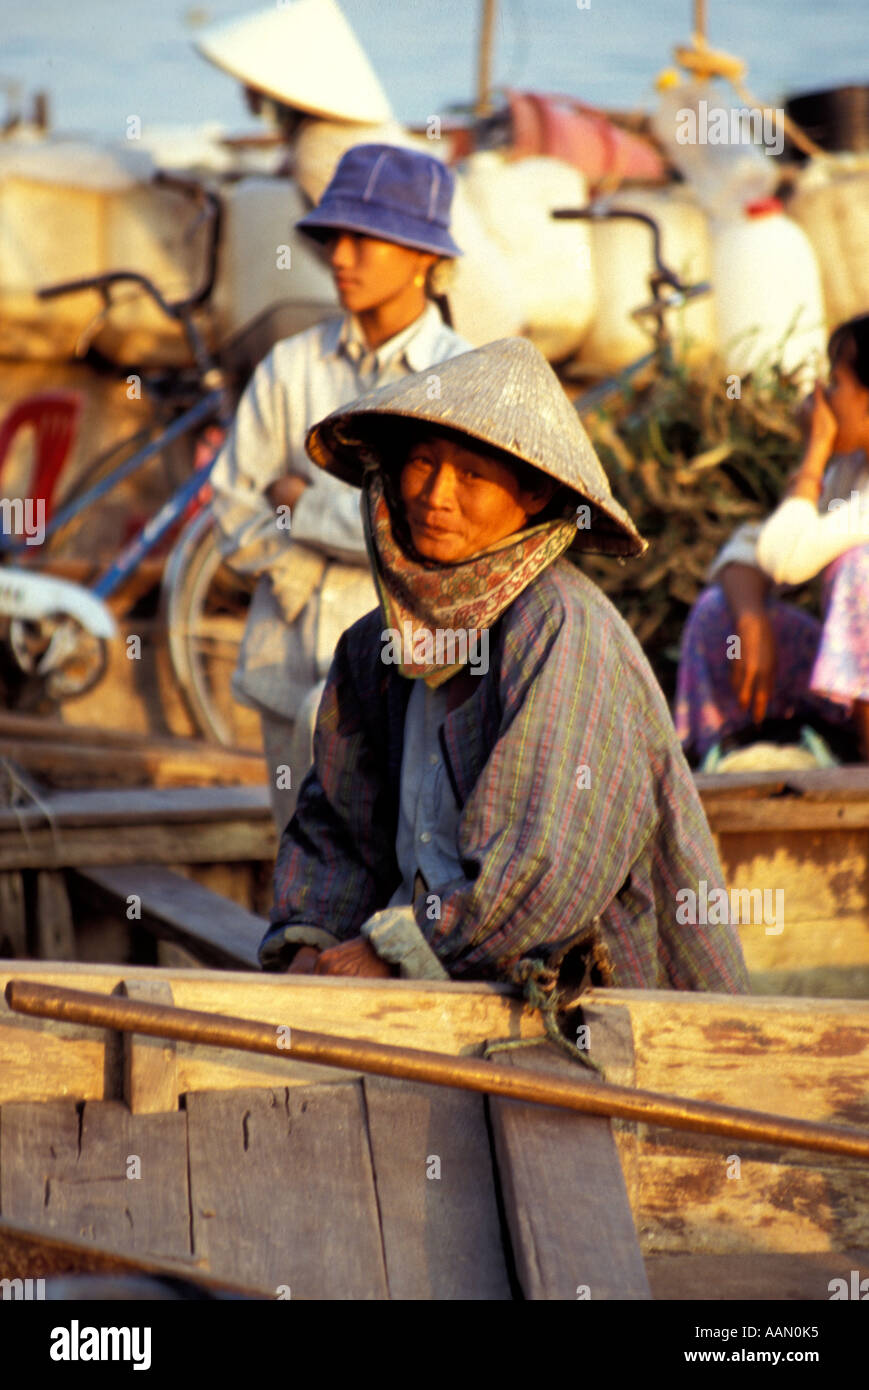 Woman on boat waiting for departure, Hoi An, Vietnam Stock Photo